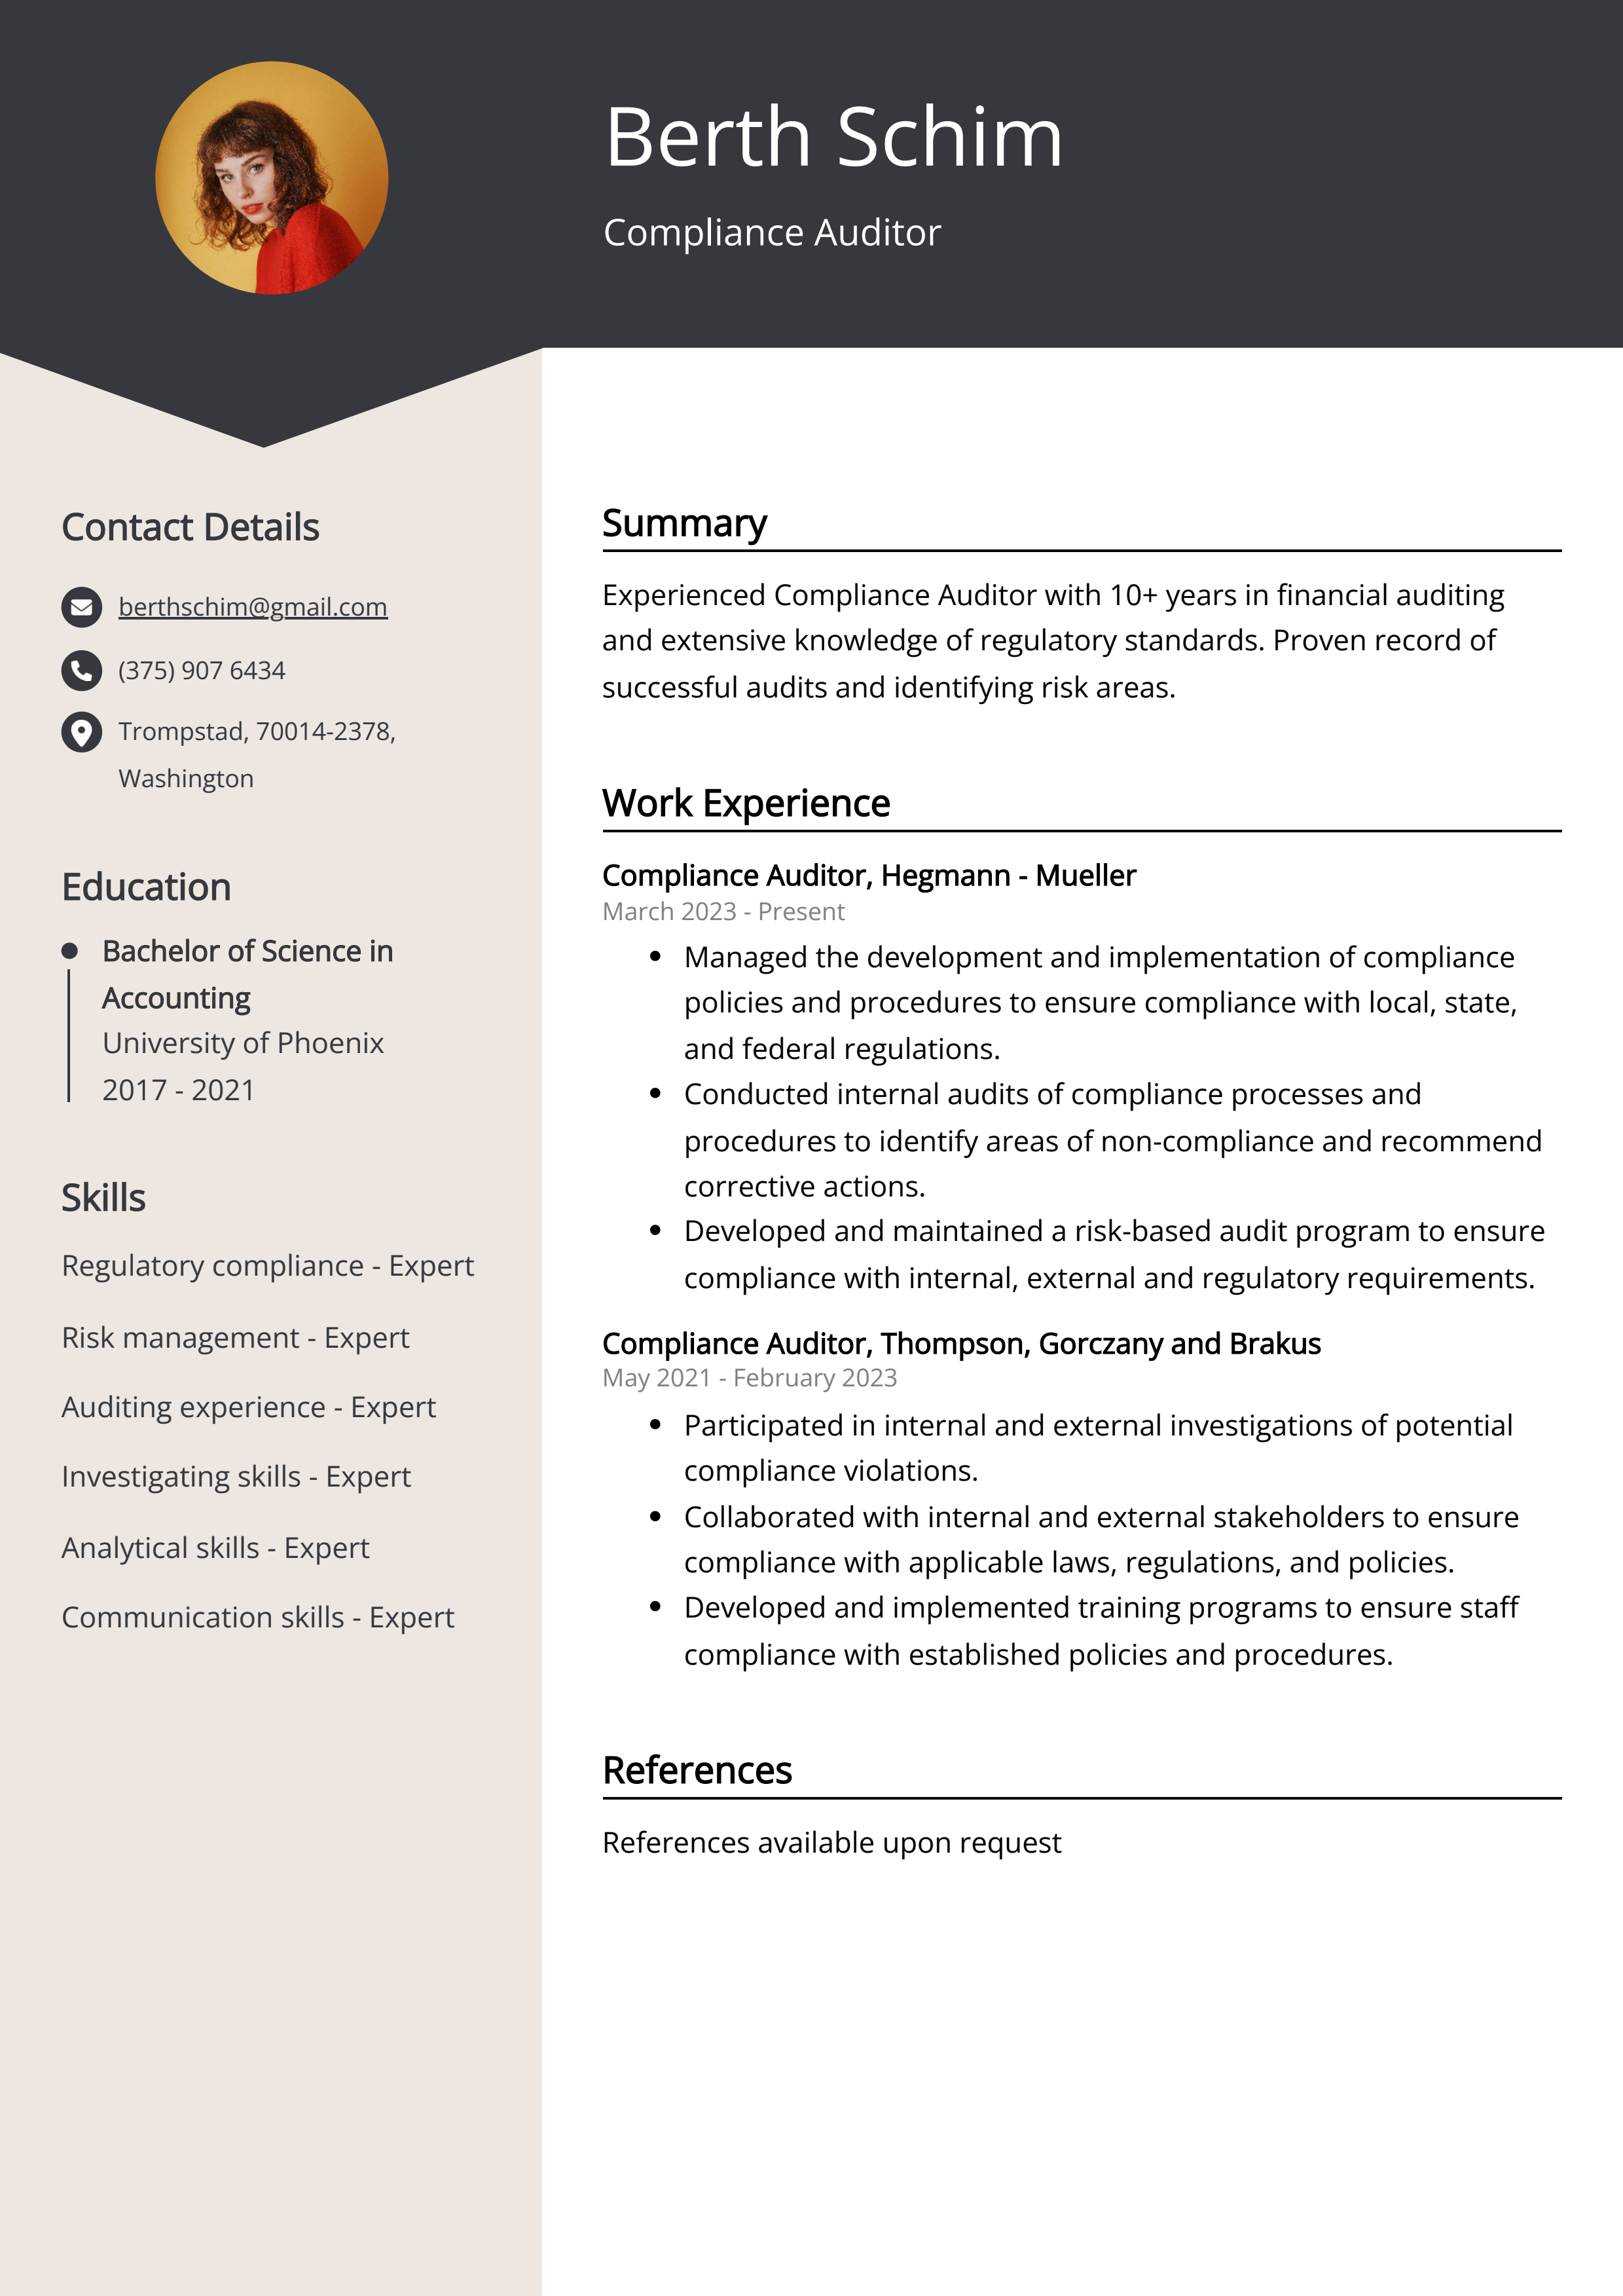 Compliance Auditor CV Example